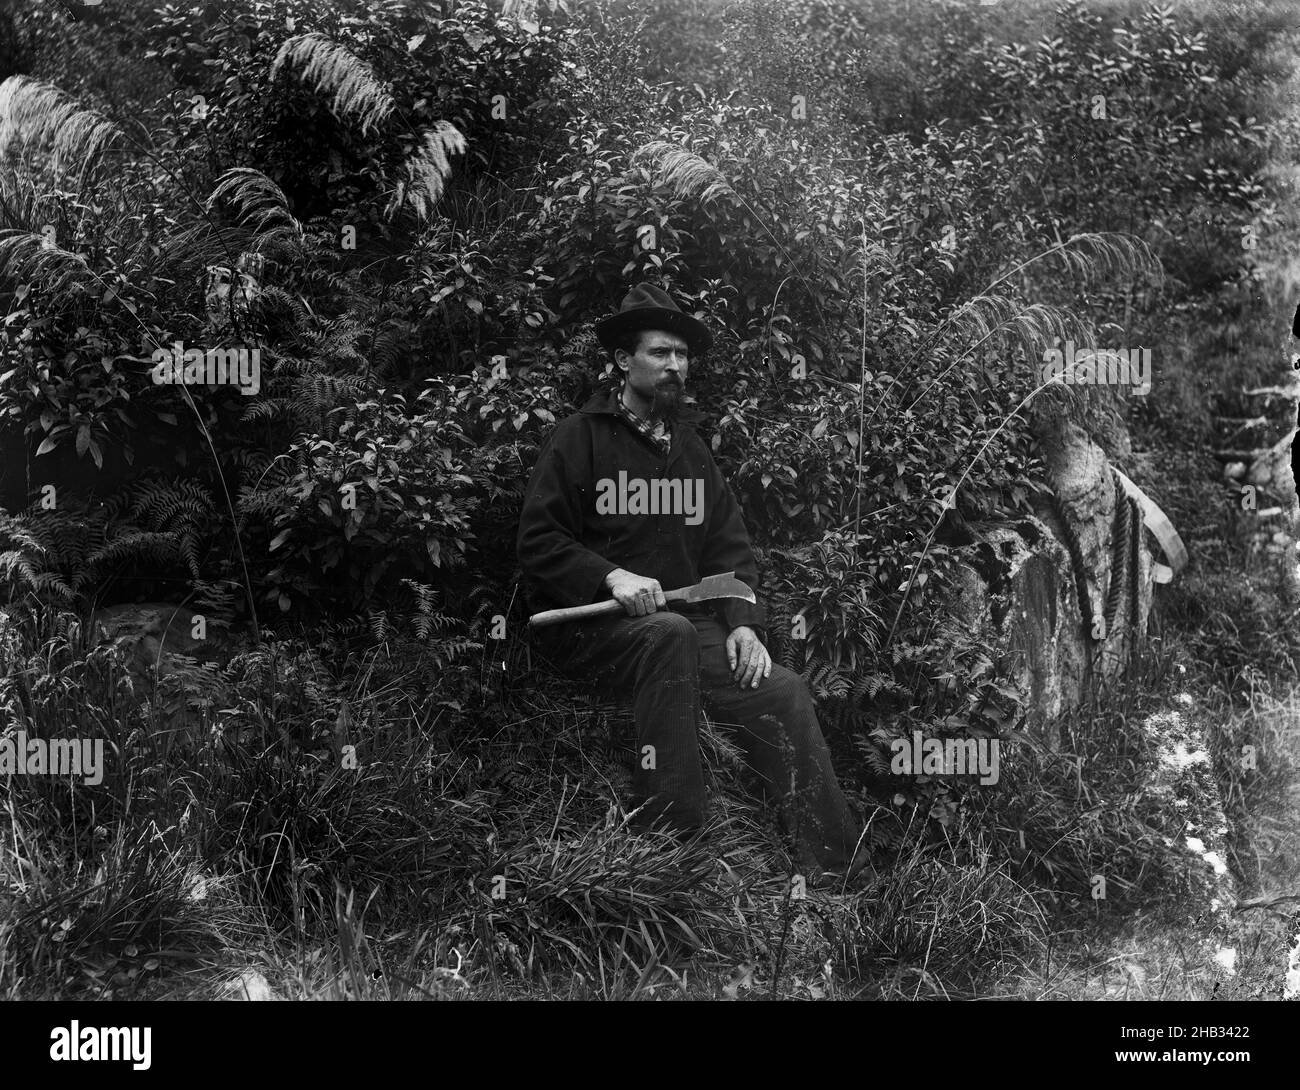 D. Sutherland, The Milford Sound Hermit, Burton Brothers studio, photography studio, January 1888, New Zealand, black-and-white photography, Formal outdoor portrait of Donald Sutherland seated in bush setting and looking away from the camera Stock Photo